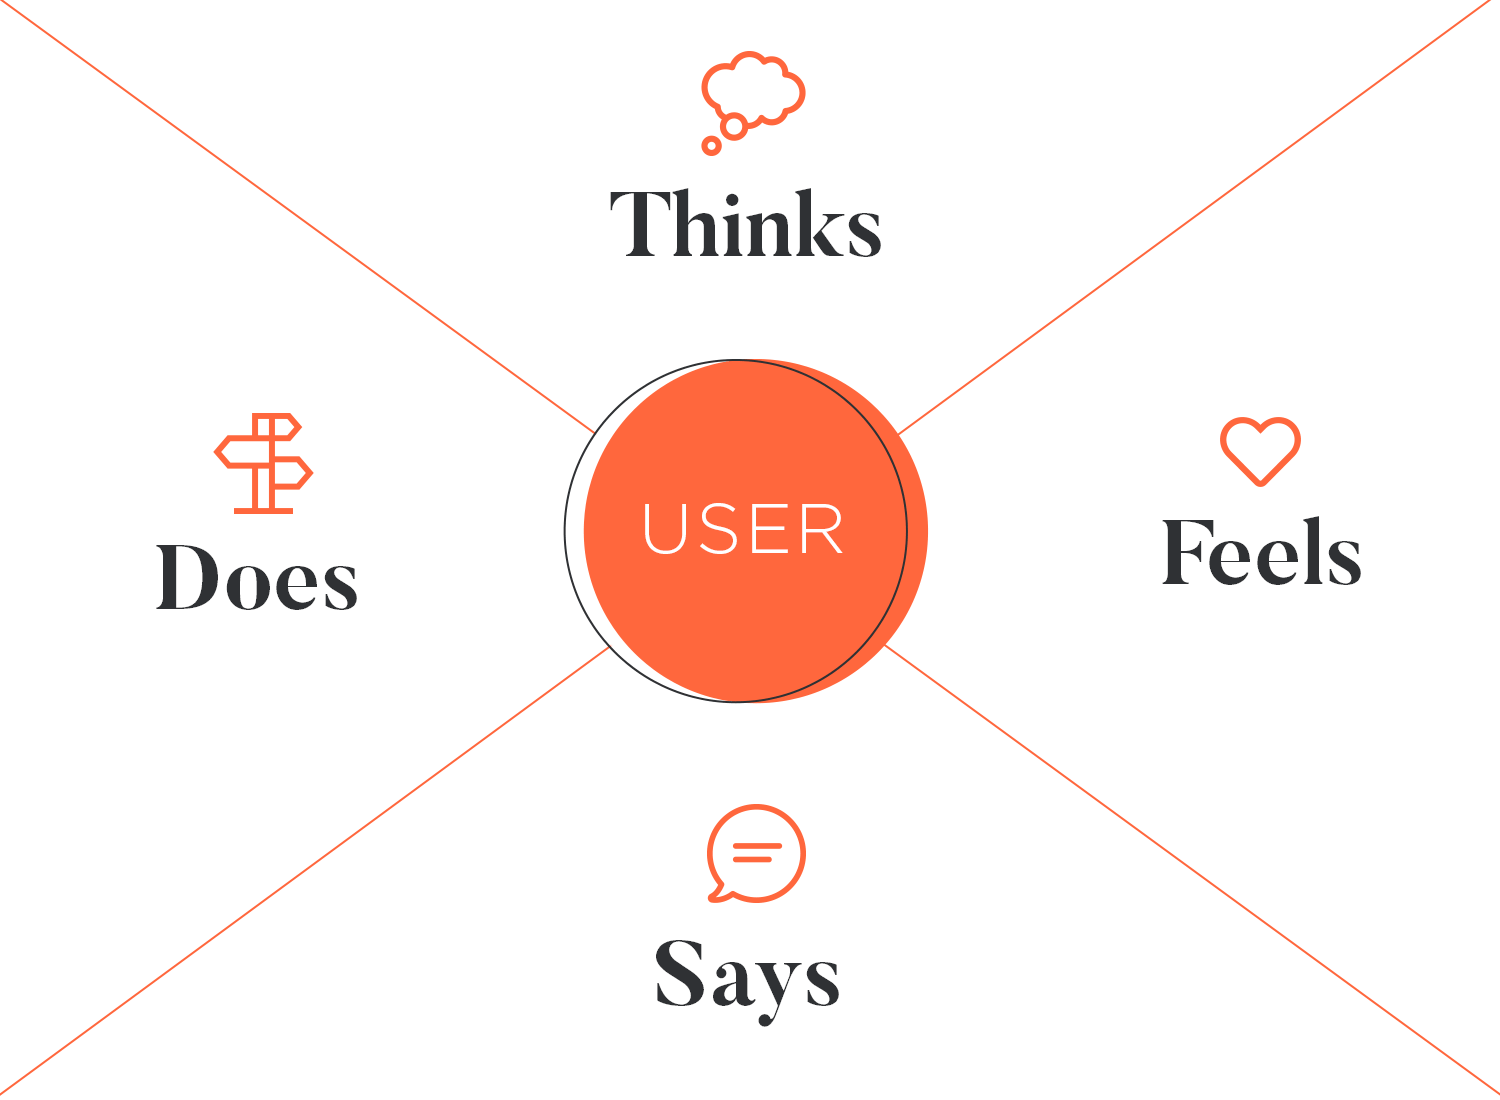 User personas - empathy map with 4 quadrants: see, think, do, feel